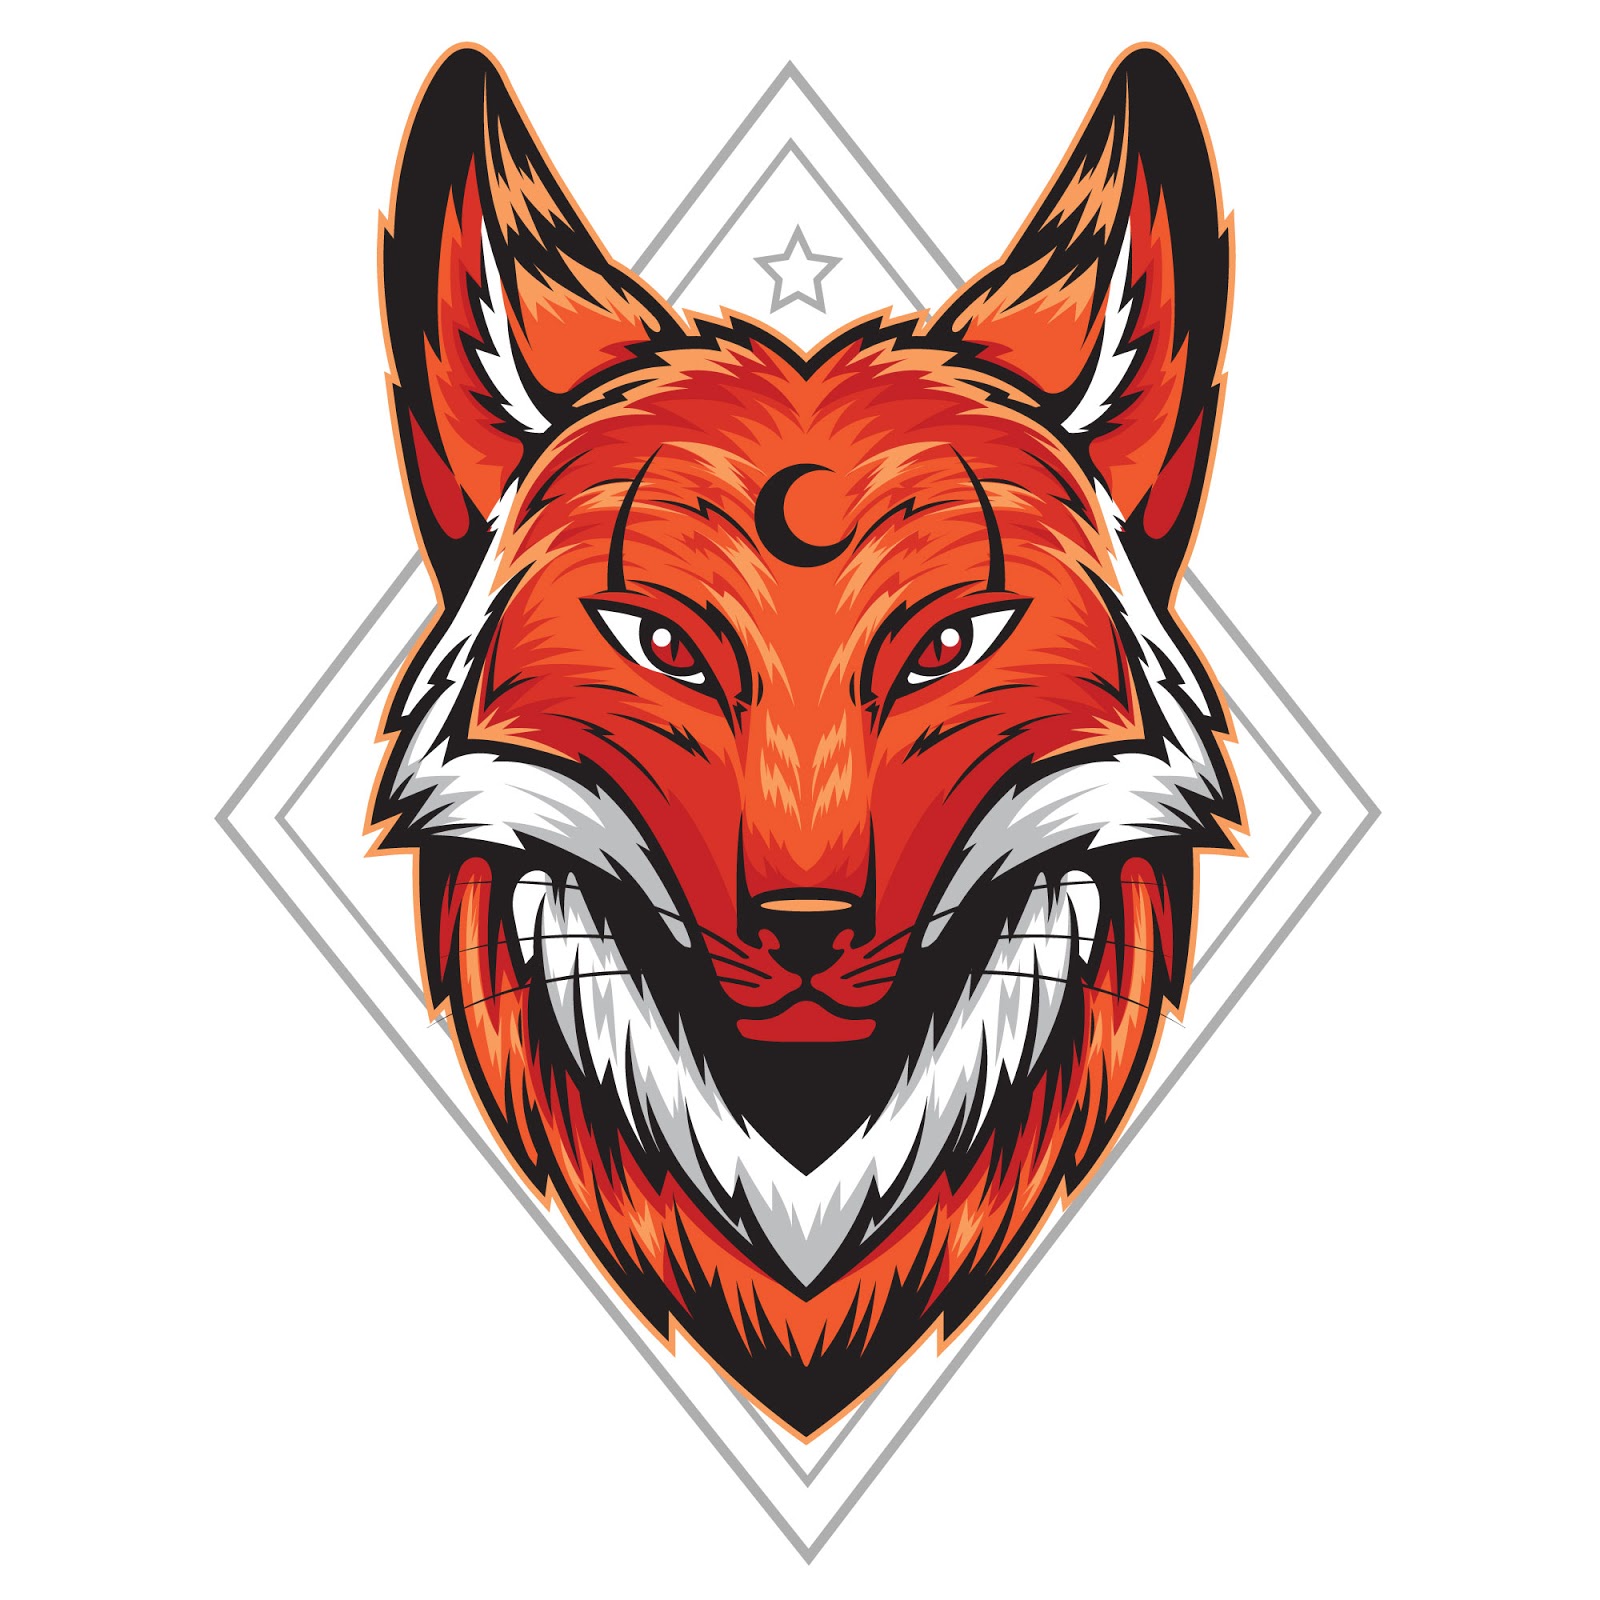 Fox Logo Free Download Vector CDR, AI, EPS and PNG Formats